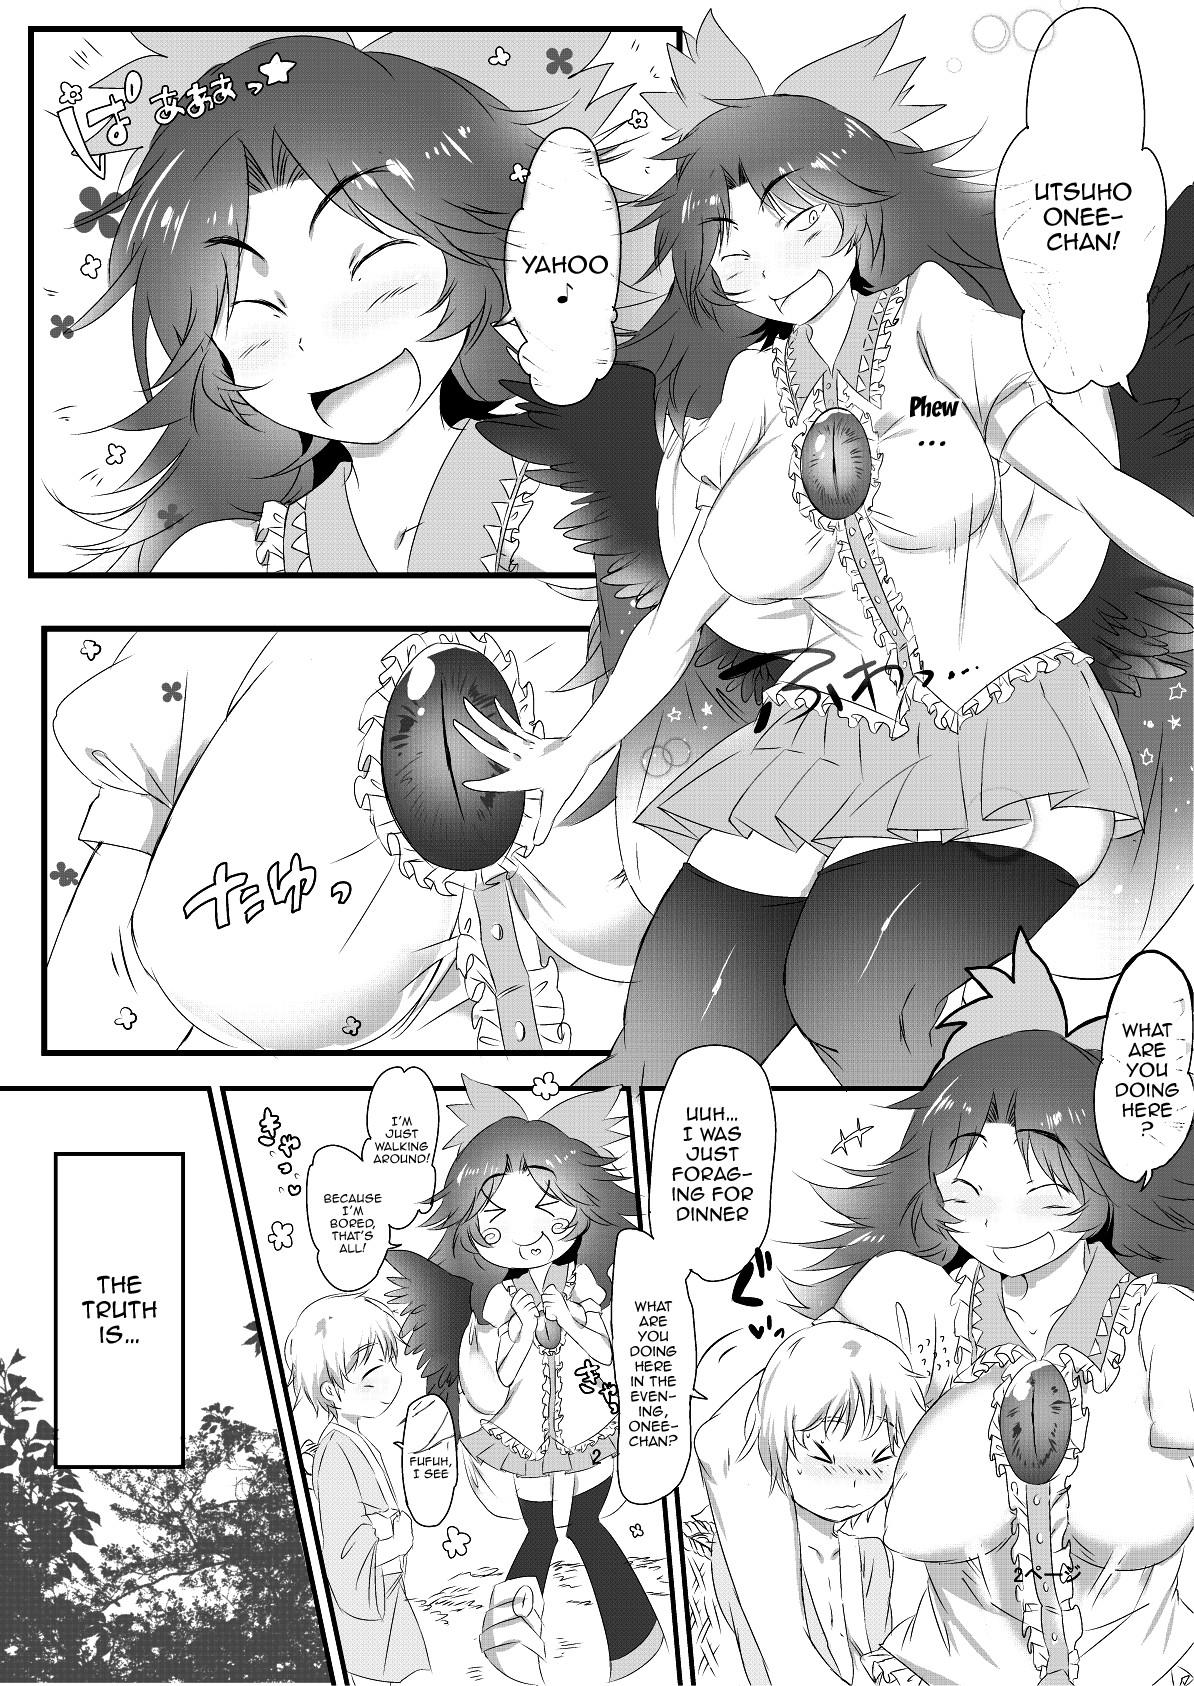 Whores Okuu-chan to Issho | Together With a Futa Youkai - Touhou project Gayclips - Page 3